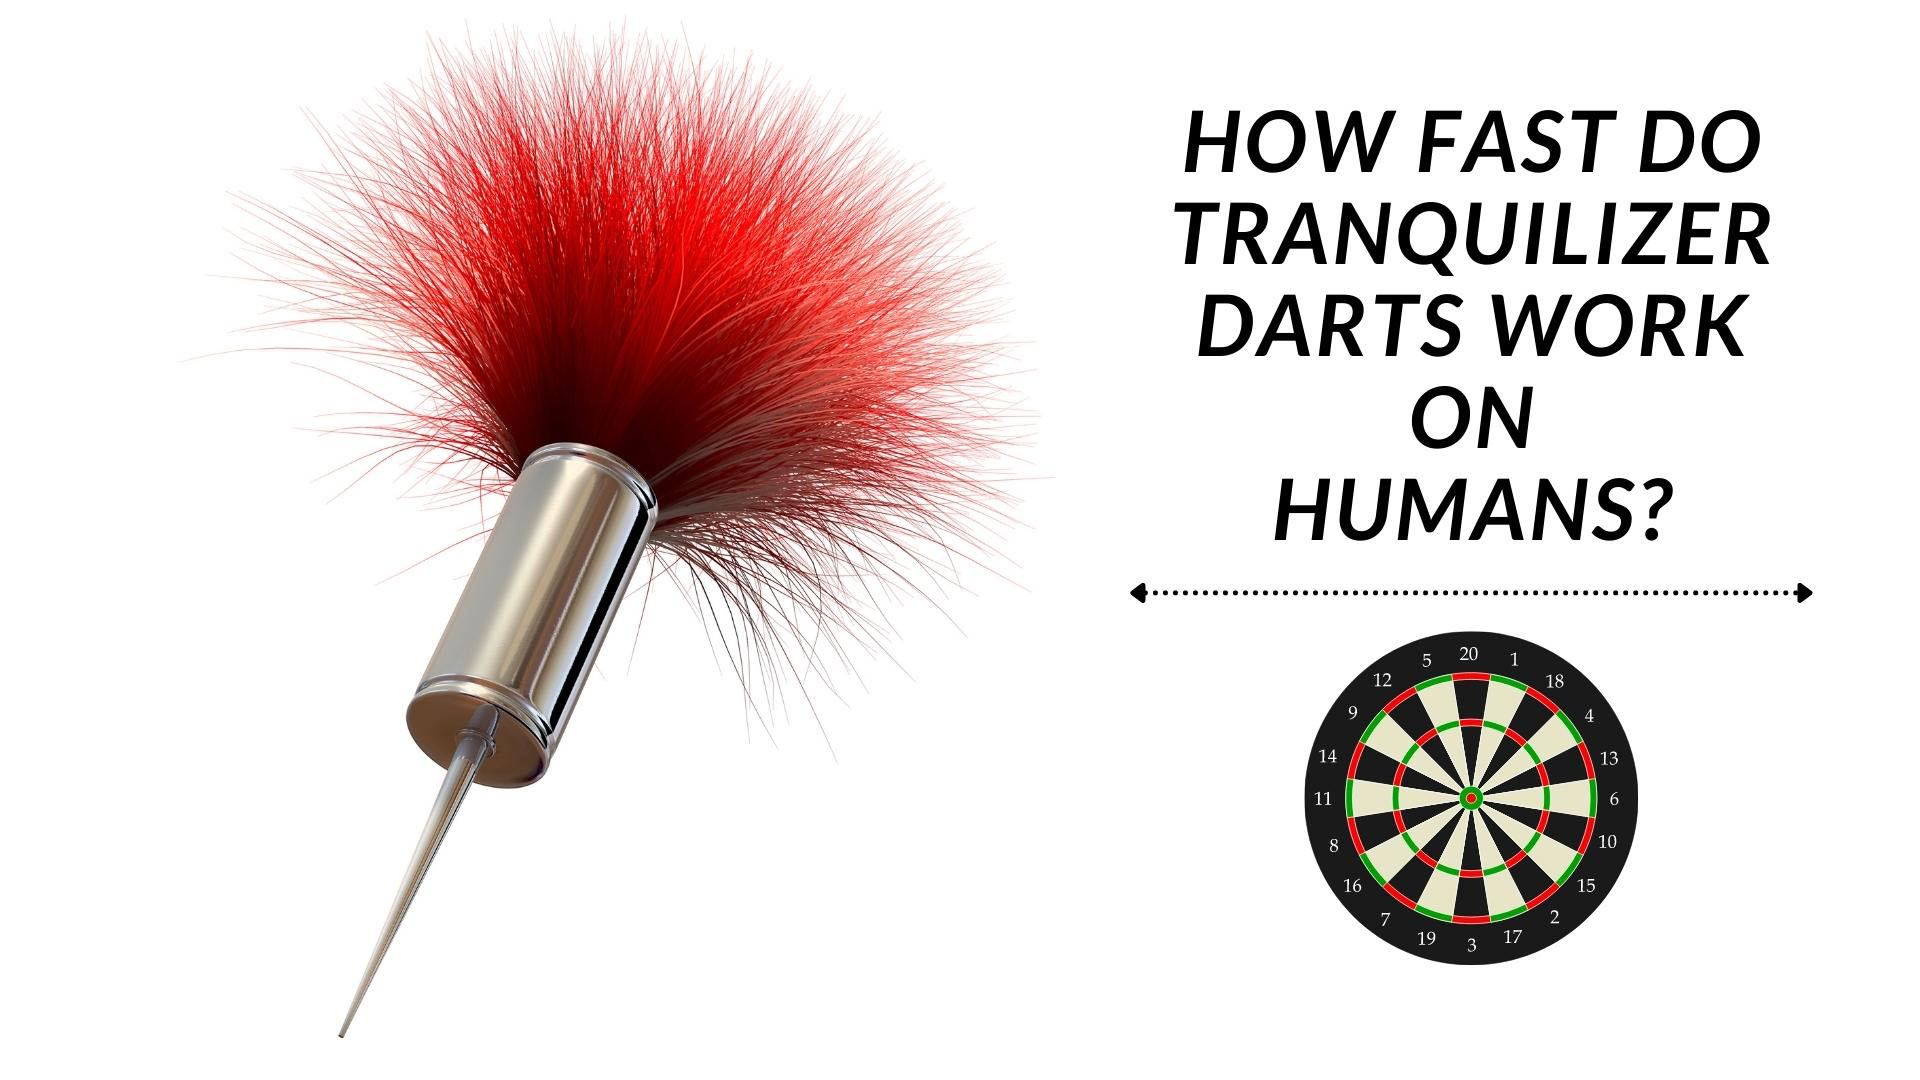 How Fast Do Tranquilizer Darts Work On Humans?